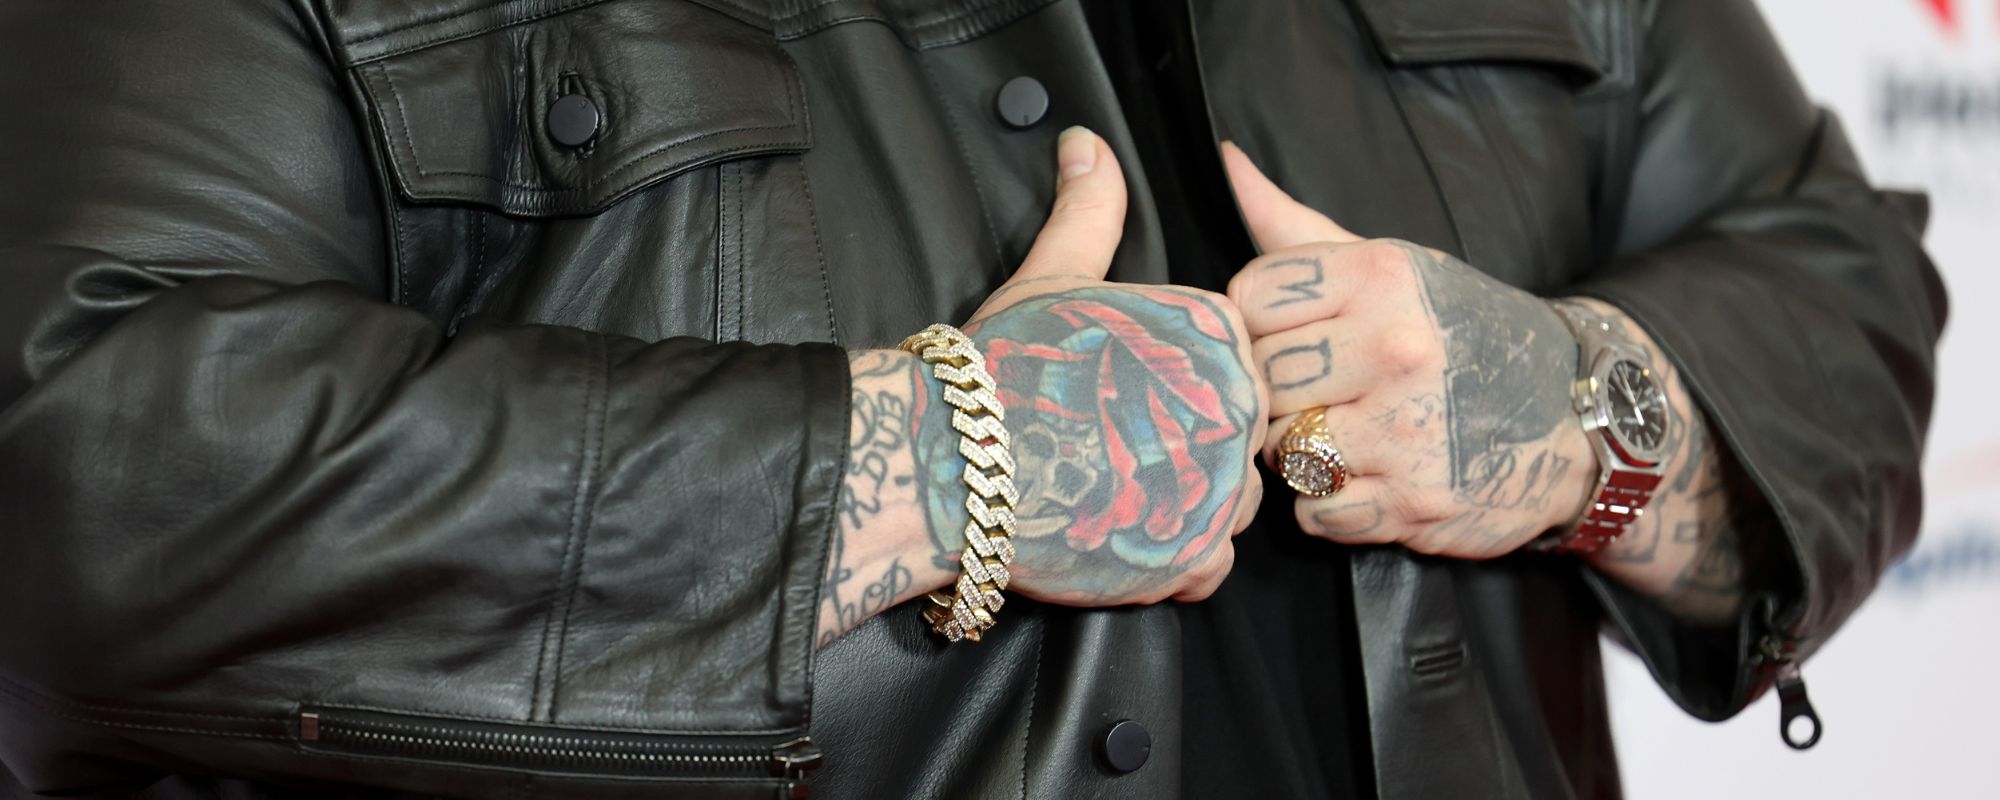 Jelly Roll Reveals the Hilarious Tattoo Misspelling He Had Covered Up